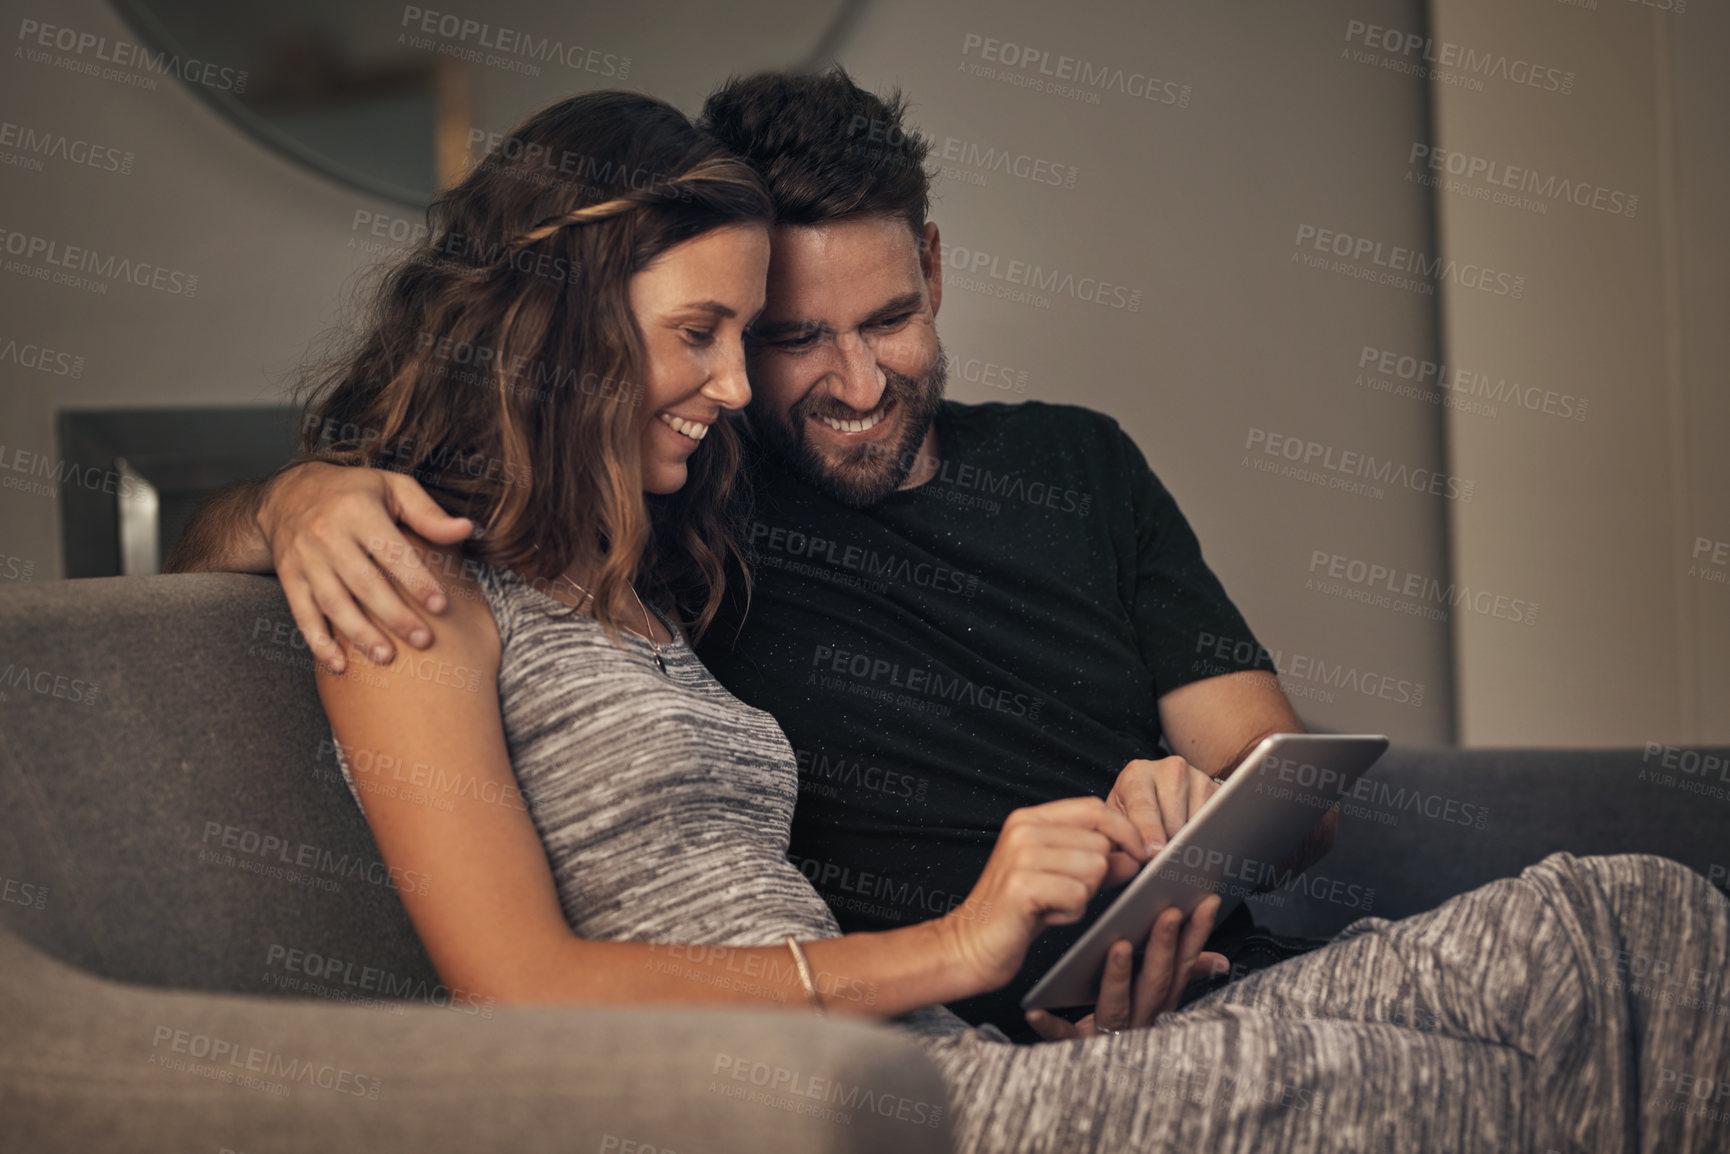 Buy stock photo Shot of a young couple using a digital tablet together while relaxing on the sofa at home